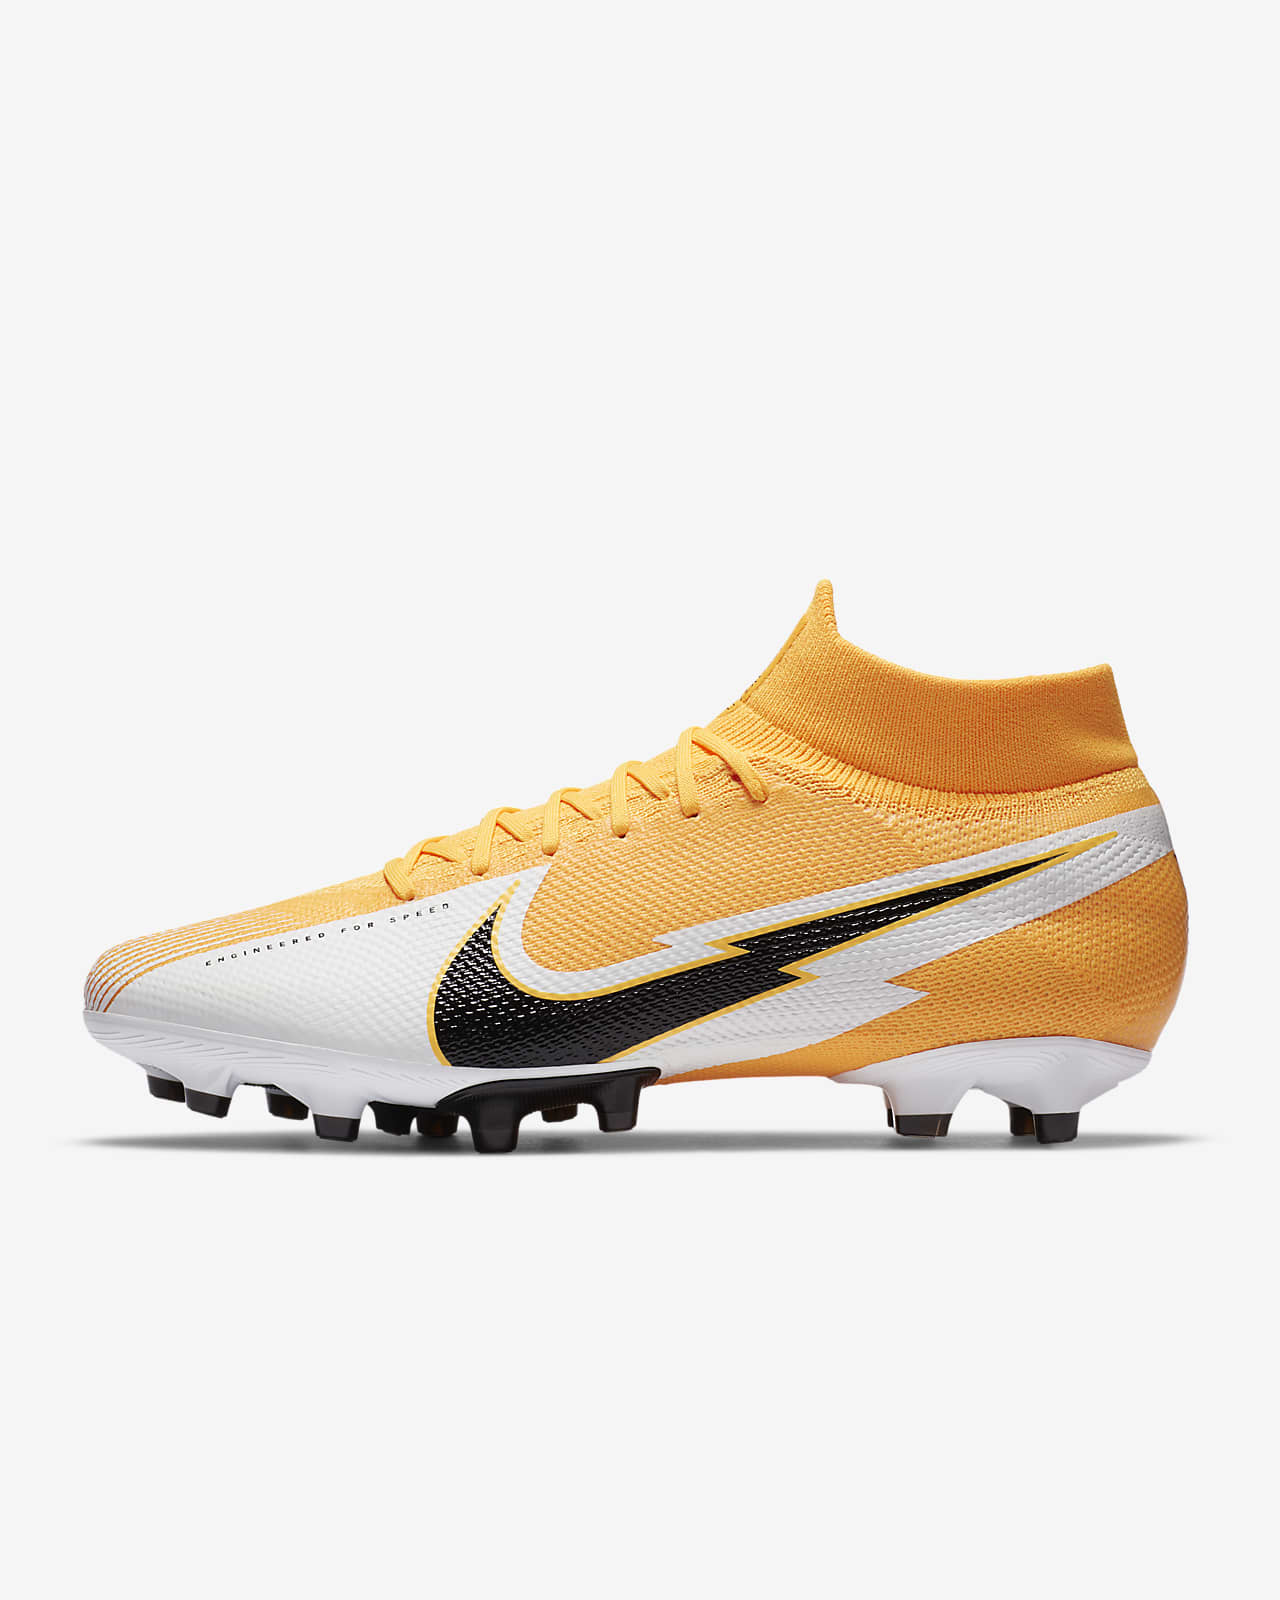 Nike Mercurial Superfly 7 Pro AG-PRO Artificial-Grass Football Boot. Nike LU